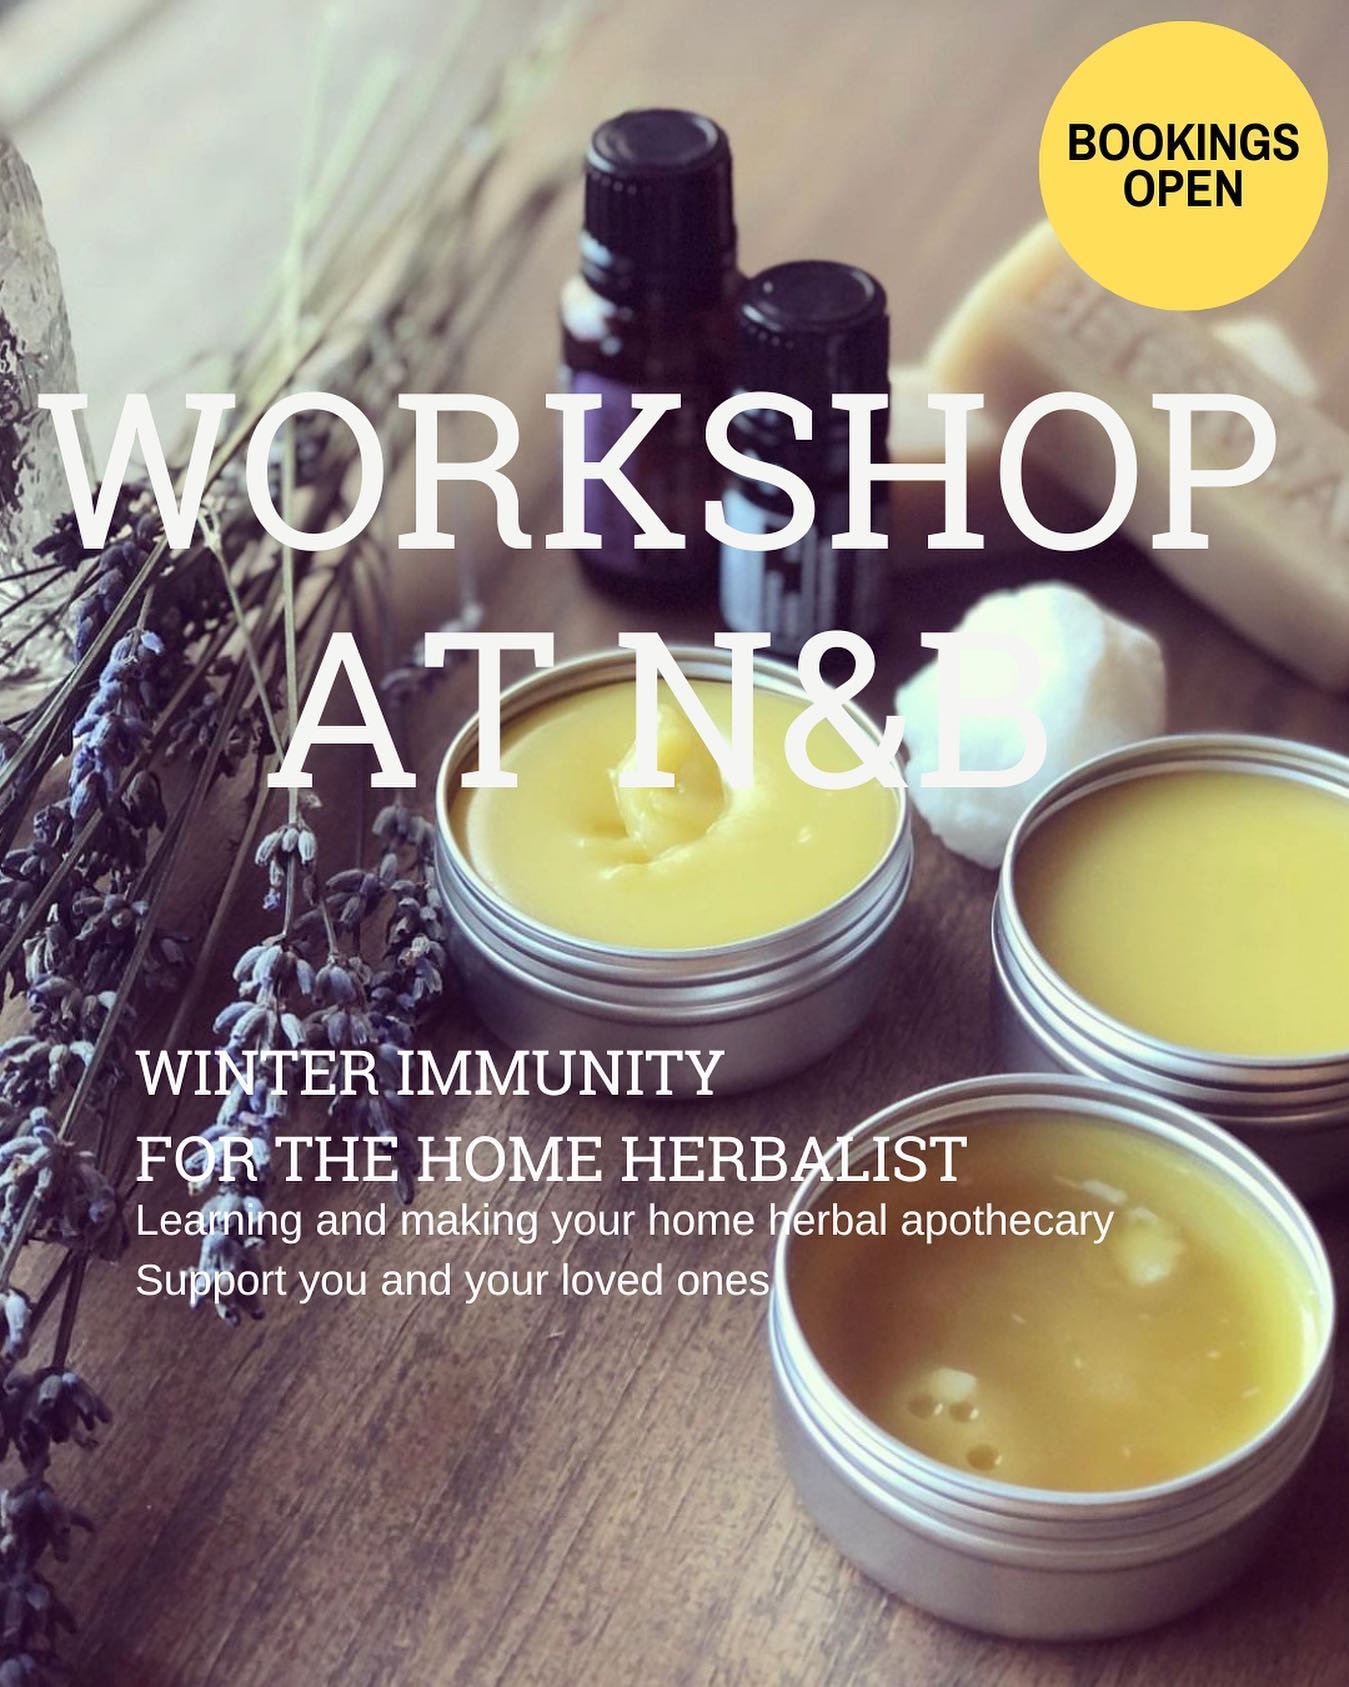 WORKSHOP AT N&amp;B

Learning and making of herbal medicinal remedies for 

WINTER IMMUNITY

Come have some fun at N&amp;B
Saturday 4th May 12-2pm

Make your own herbal remedies to take home with you
🍎 fire cider
🌿 throat soothe
🌻 chest rub

Plus 